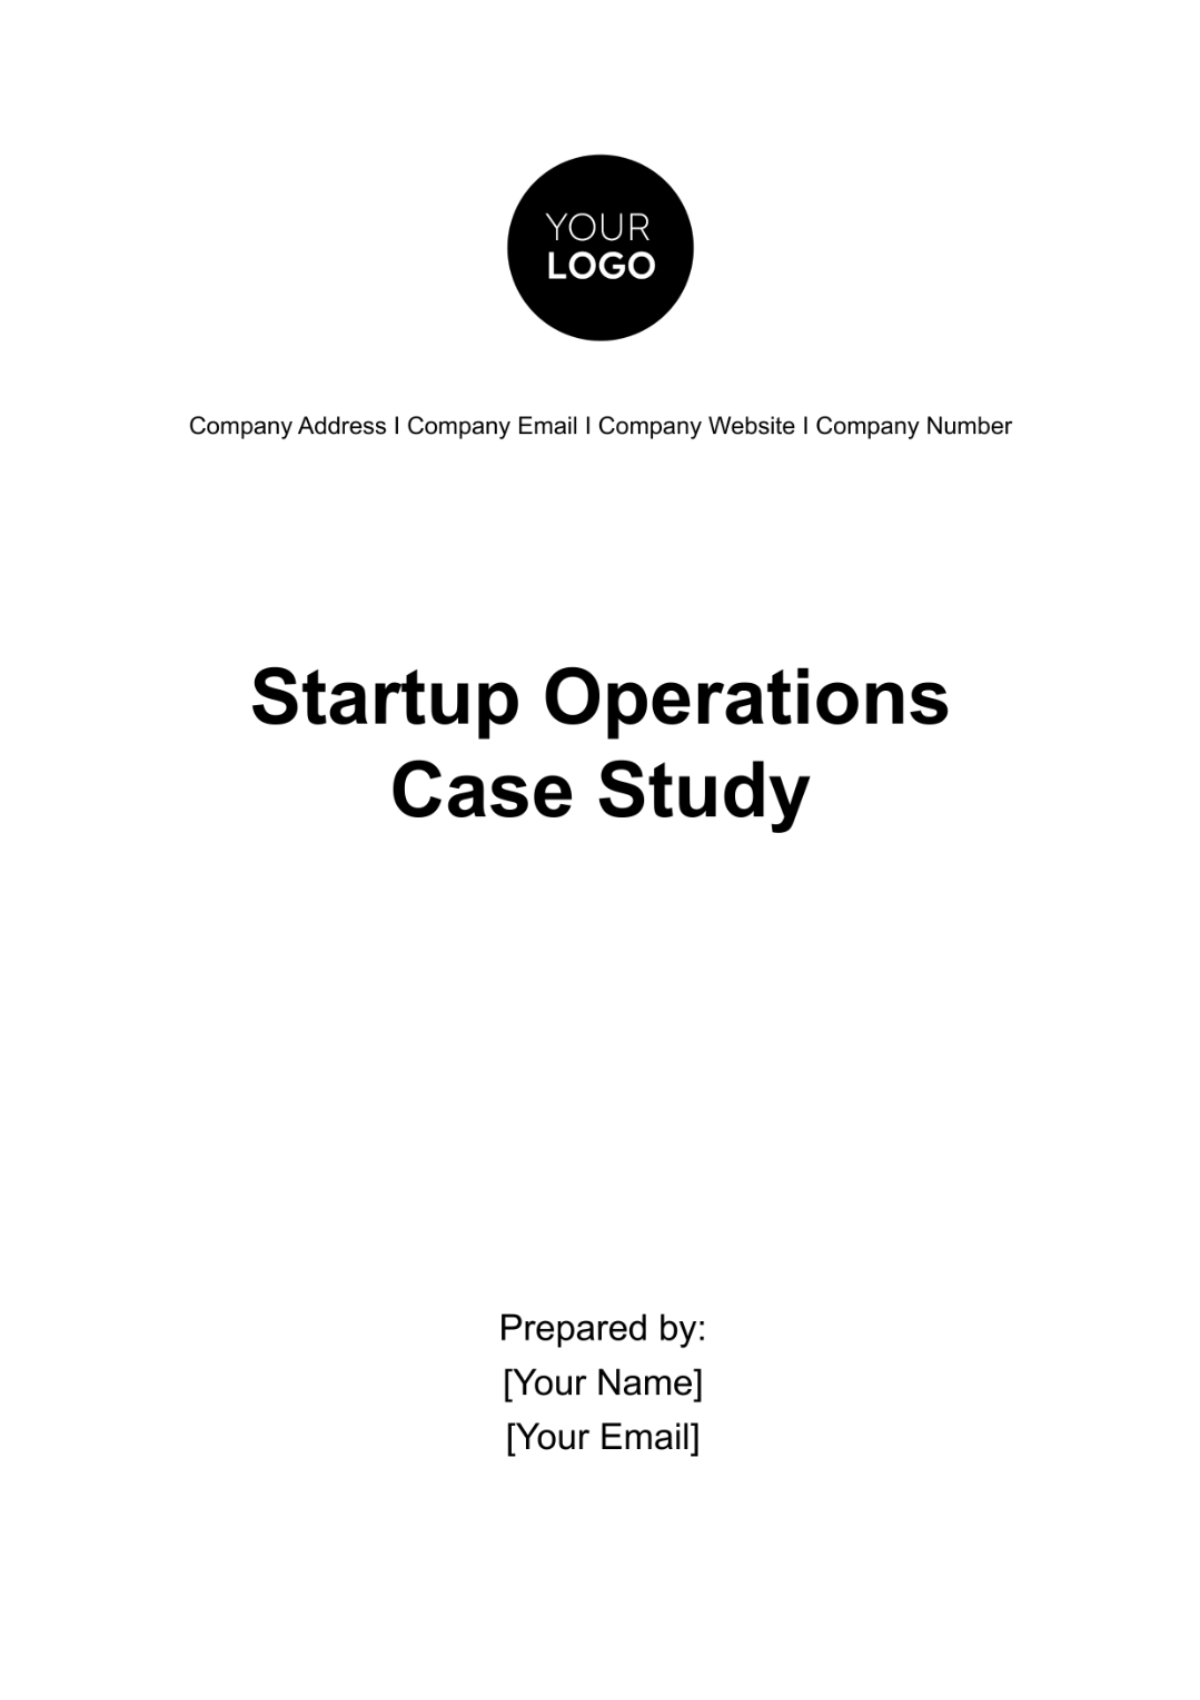 Startup Operations Case Study Template